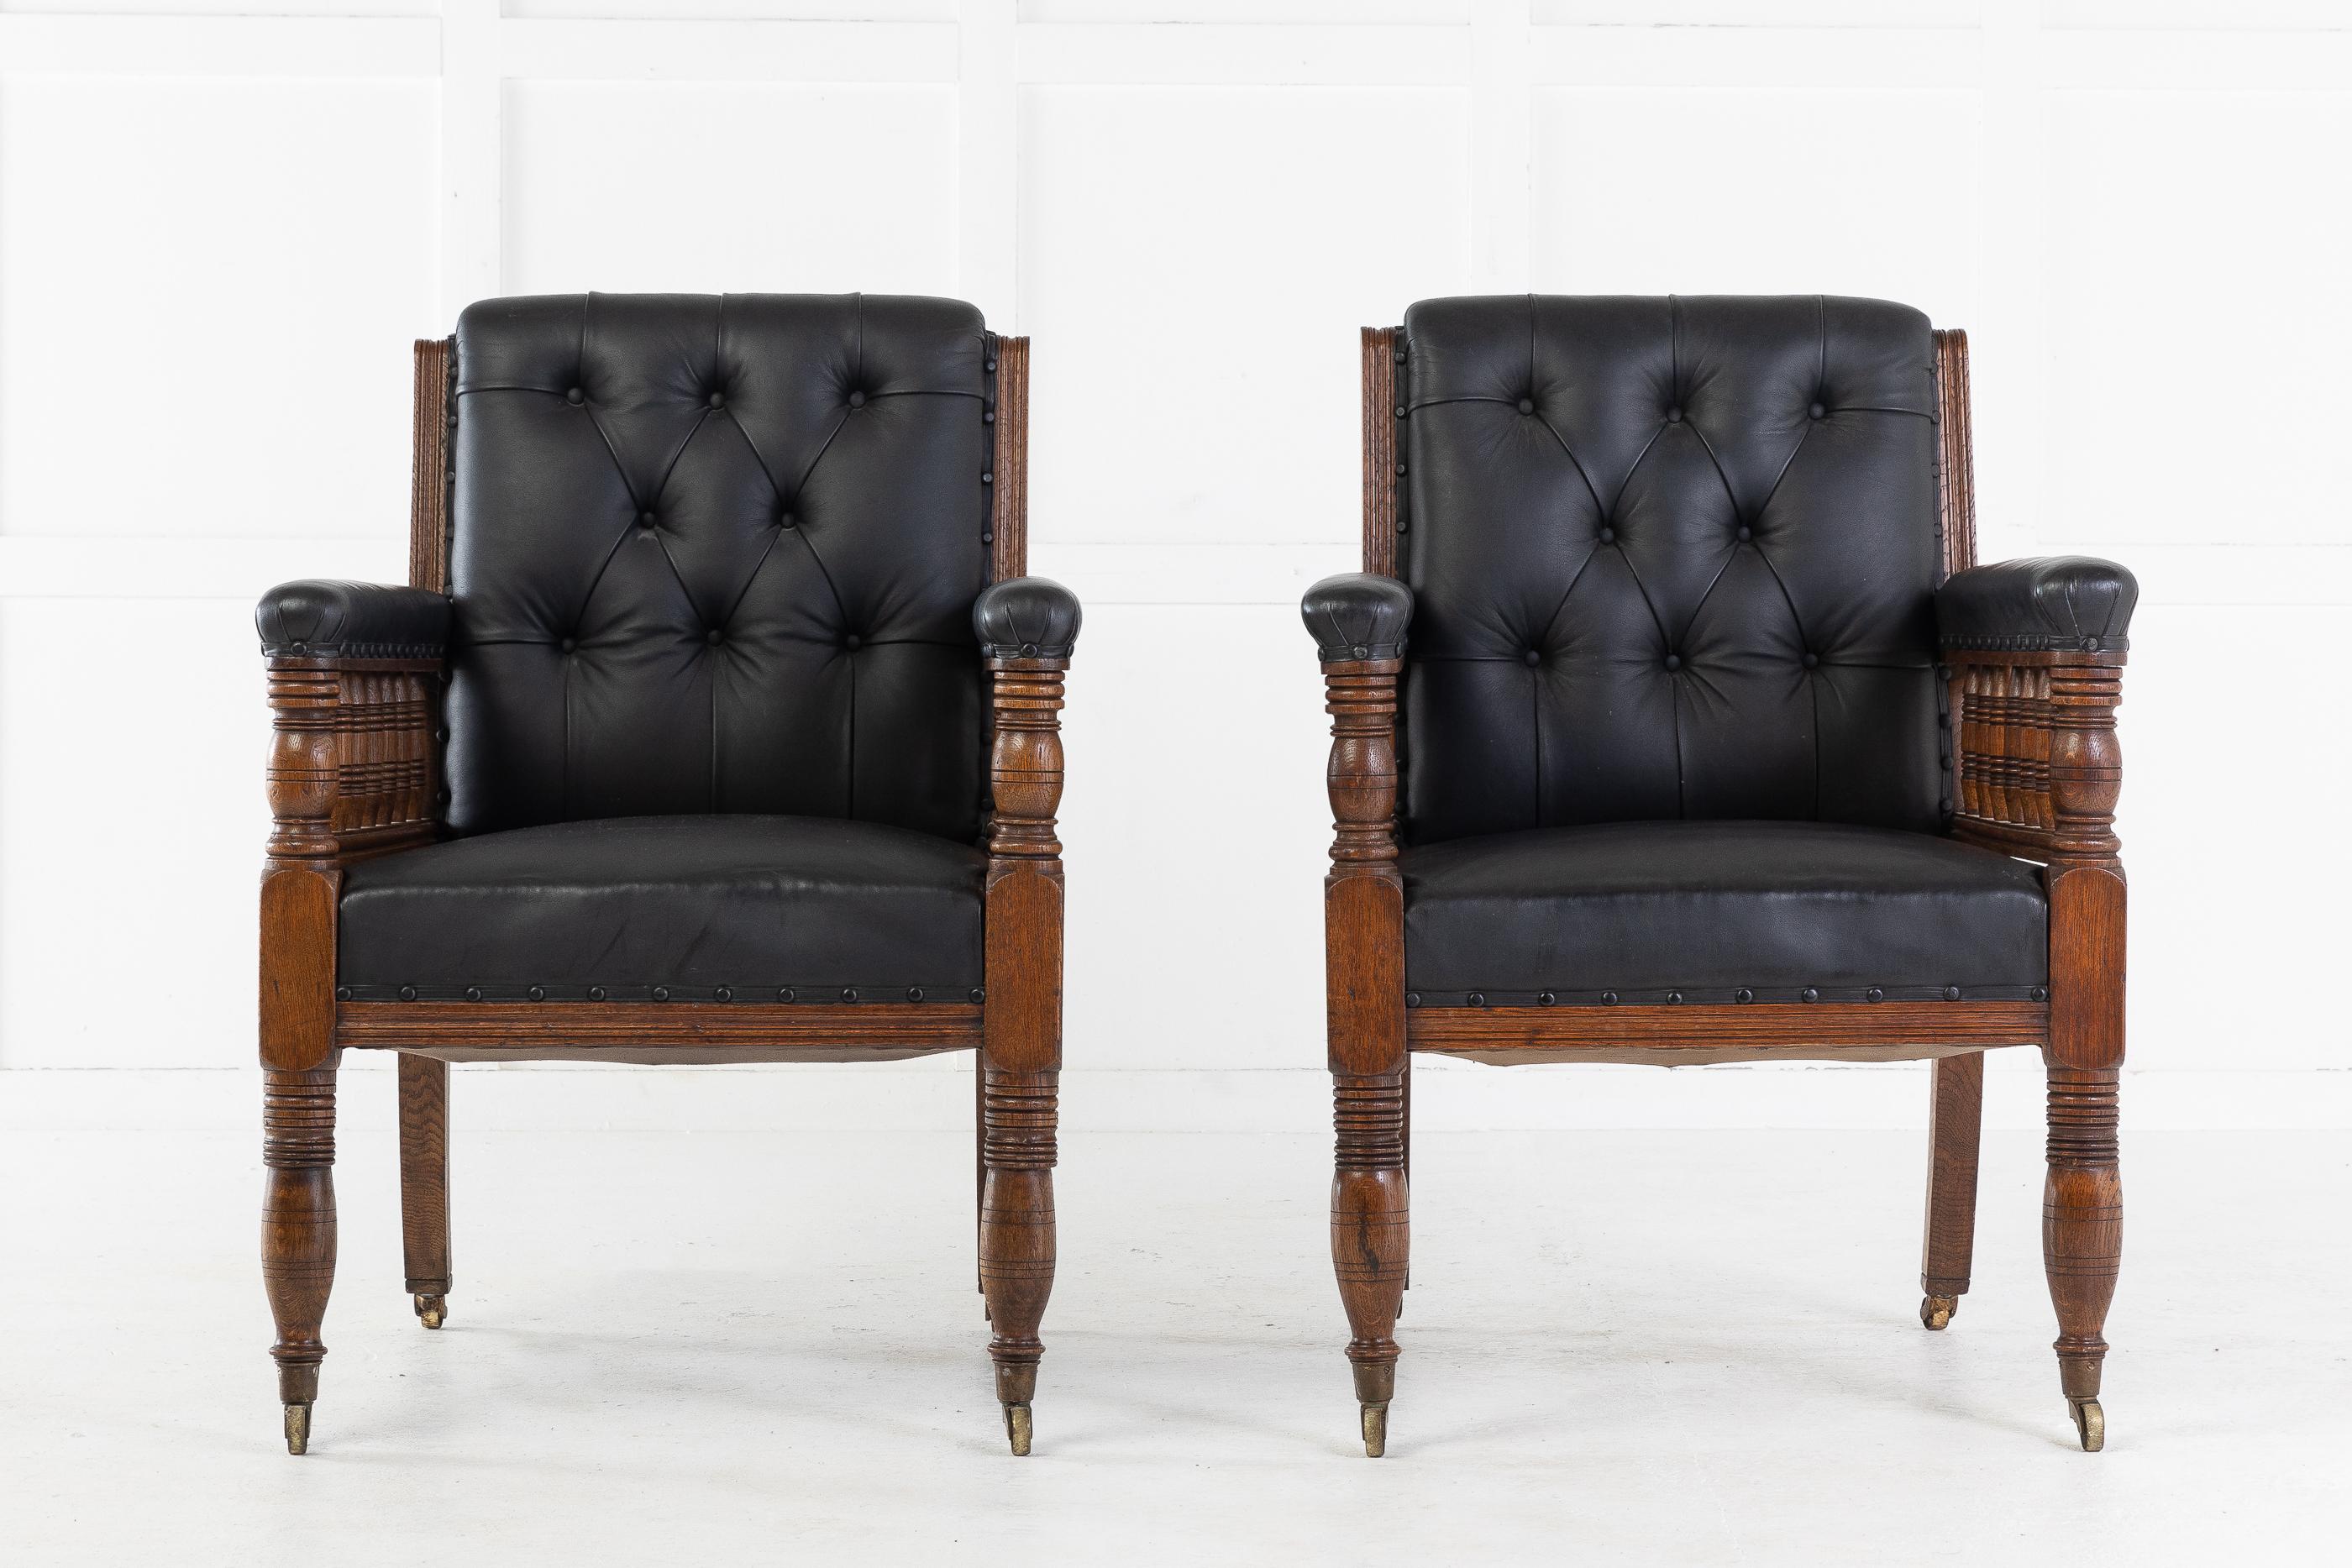 Pair of large scale, oversized 19th century oak, button backed, armchairs with nicely turned spindle, decorated arms. Upholstered in quality blue hide. Turned front legs and outswept back legs, terminating in brass castors.
      